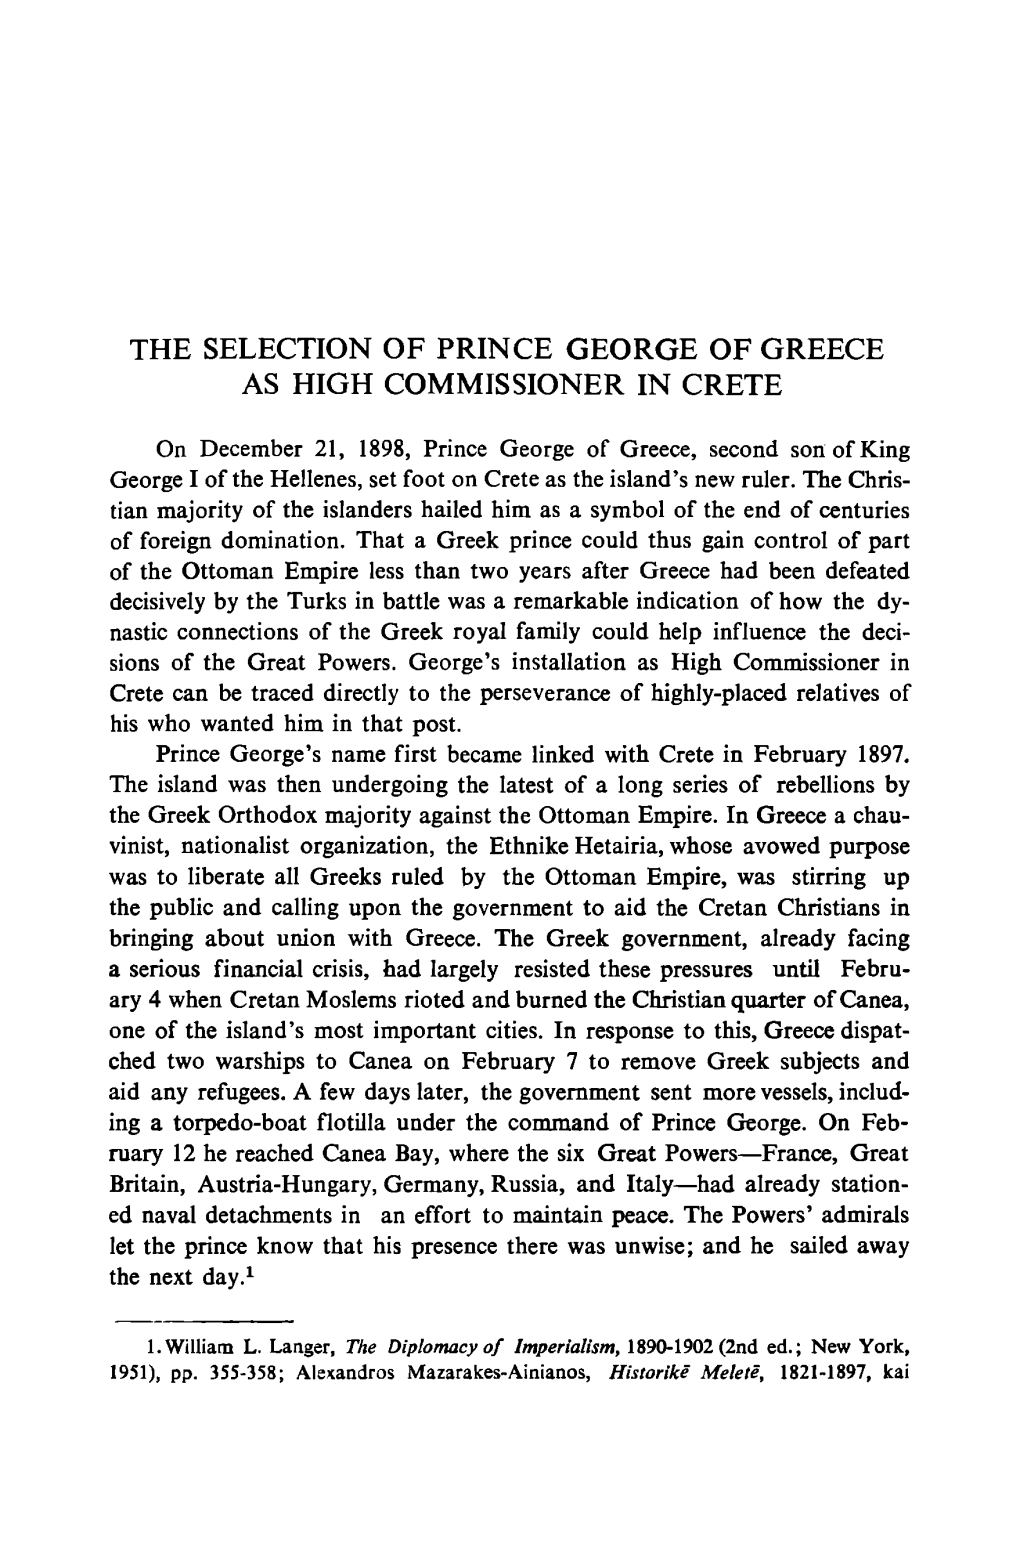 The Selection of Prince George of Greece As High Commissioner in Crete